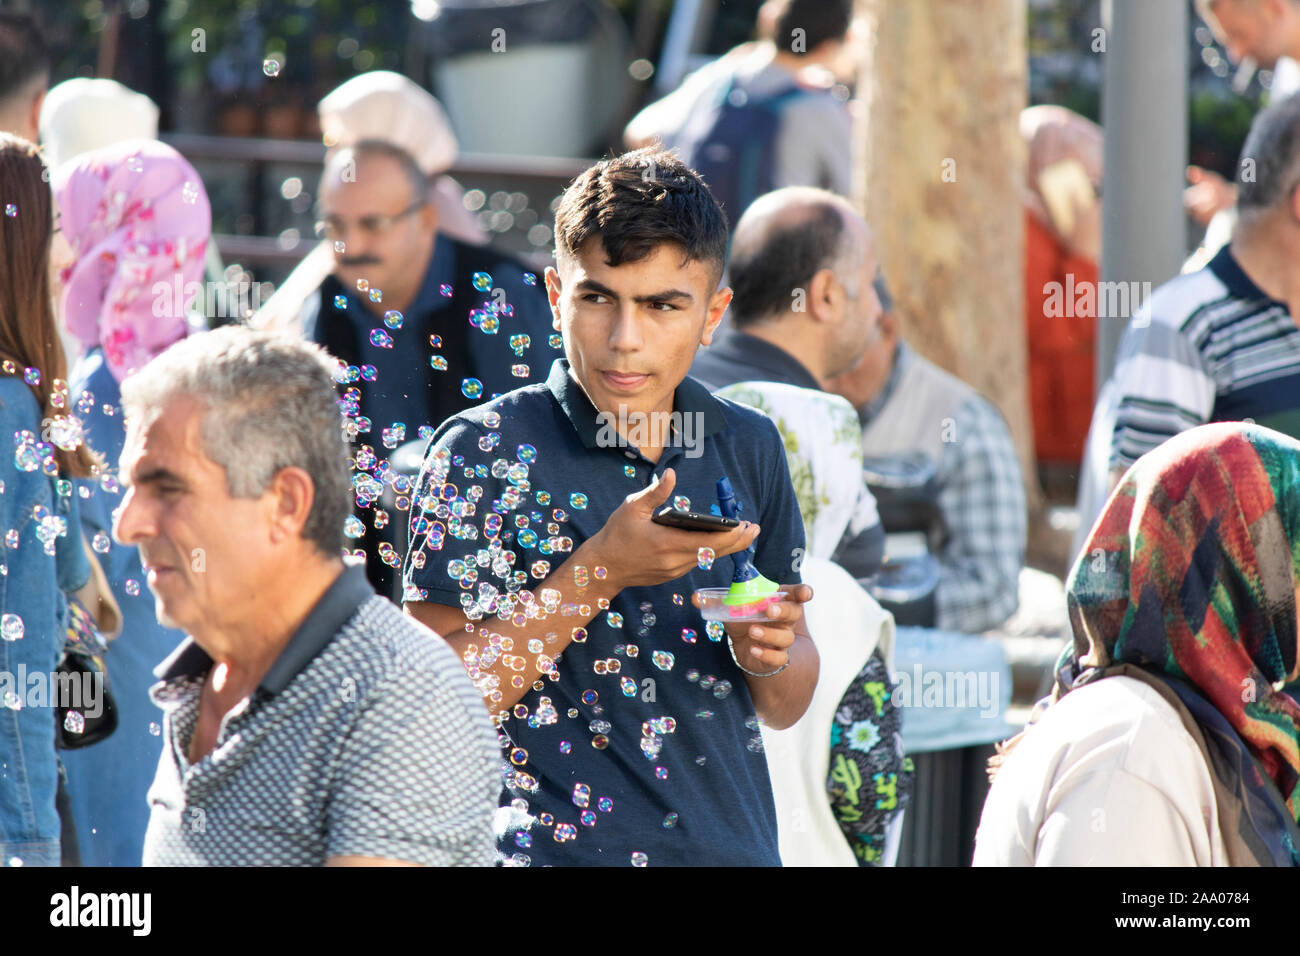 Istanbul, Turkey - September-28.2019: Child worker in Istanbul selling soap bubble machine Stock Photo